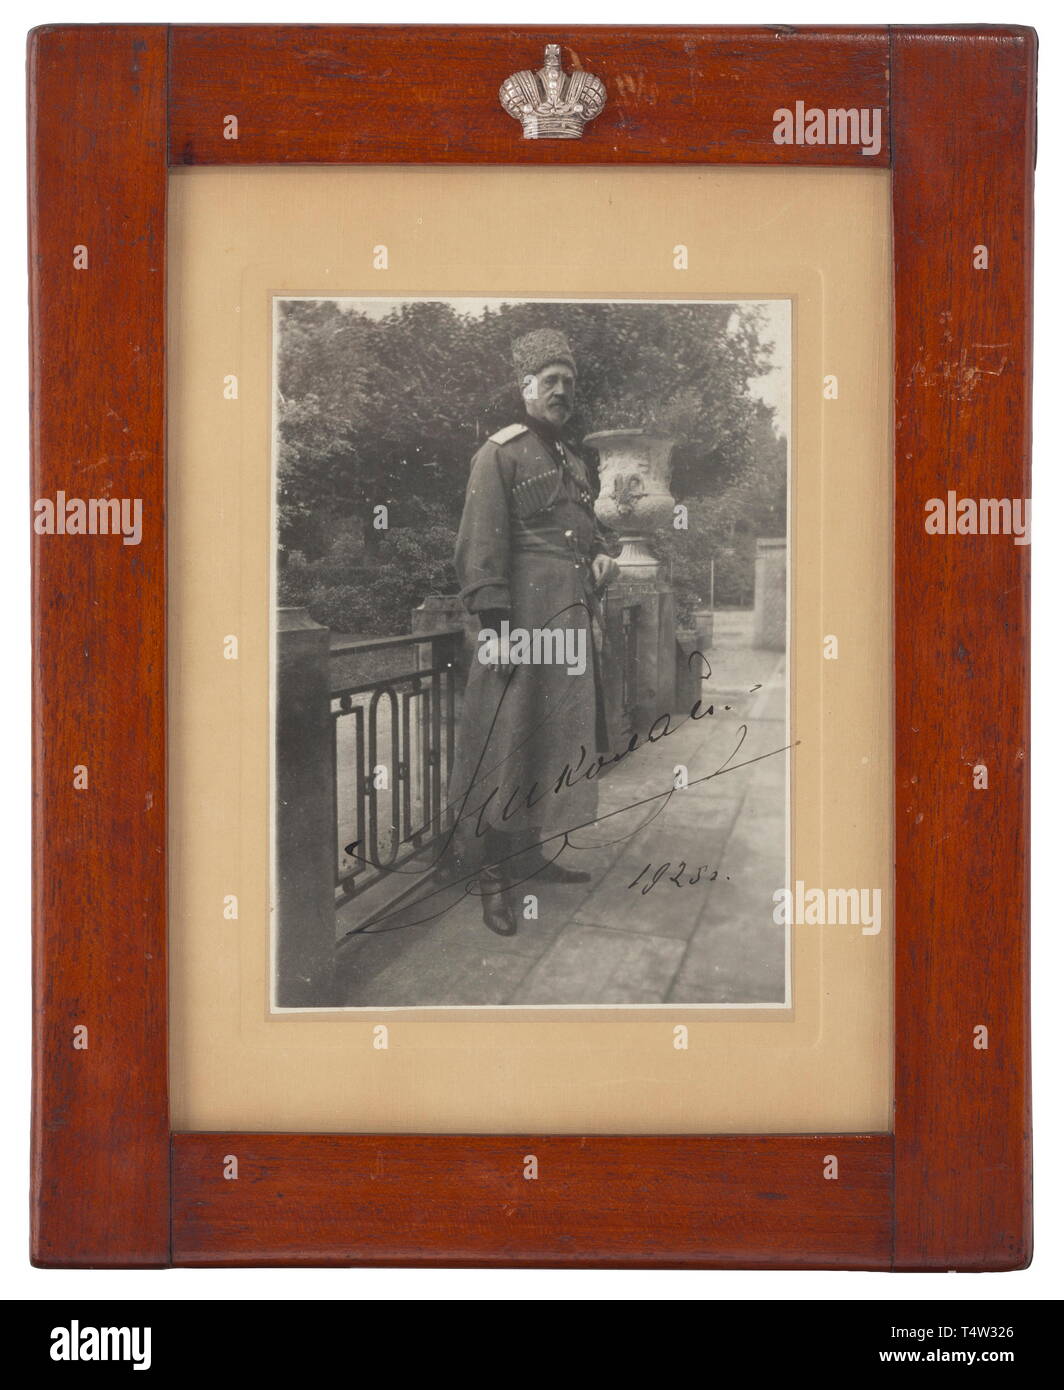 A portrait photograph of the Grand Duke Nicholas Nikolaevich Romanov with his handwritten ink signature. France, 1925. Under glass, in brown lacquered wooden frame with an applied silver-plated tsarïs crown at top. Picture dimensions circa 17 x 12.8 cm. Framed dimensions 30.5 x 24.8 cm. Rare. Grand Duke Nicholas Nikolaevich Romanov (1856 - 1929) was a grandson of Tsar Nicholas I, Supreme Commander of the Russian forces in the First World War. He died at the French Riviera in 1929. historic, historical, 20th century, Additional-Rights-Clearance-Info-Not-Available Stock Photo